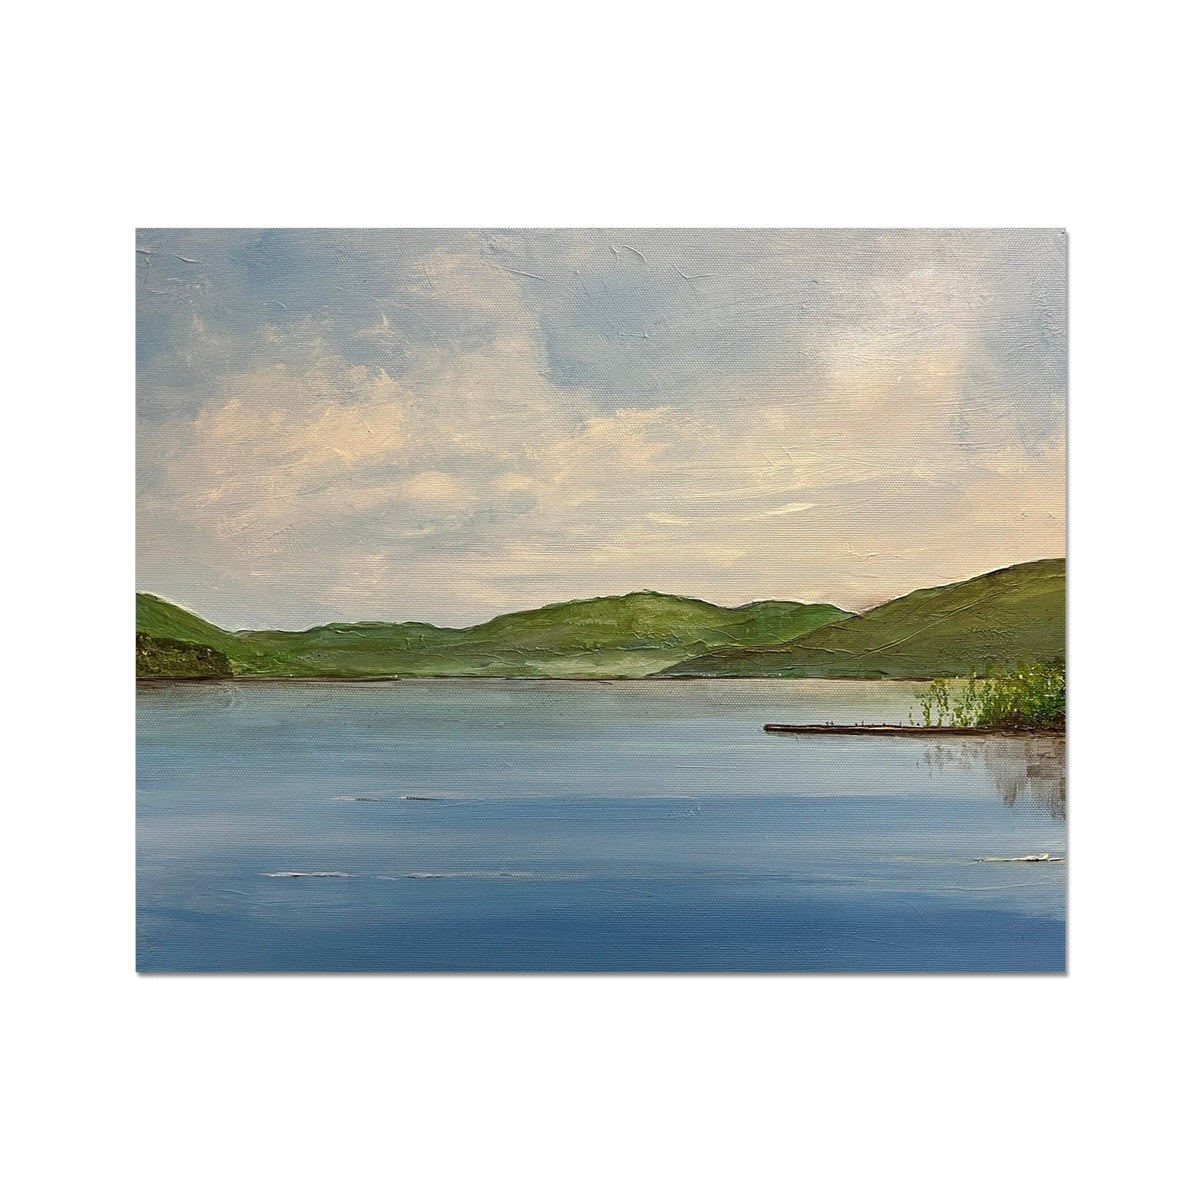 Loch Tay ii Painting | Artist Proof Collector Prints From Scotland-Artist Proof Collector Prints-Scottish Lochs & Mountains Art Gallery-20"x16"-Paintings, Prints, Homeware, Art Gifts From Scotland By Scottish Artist Kevin Hunter